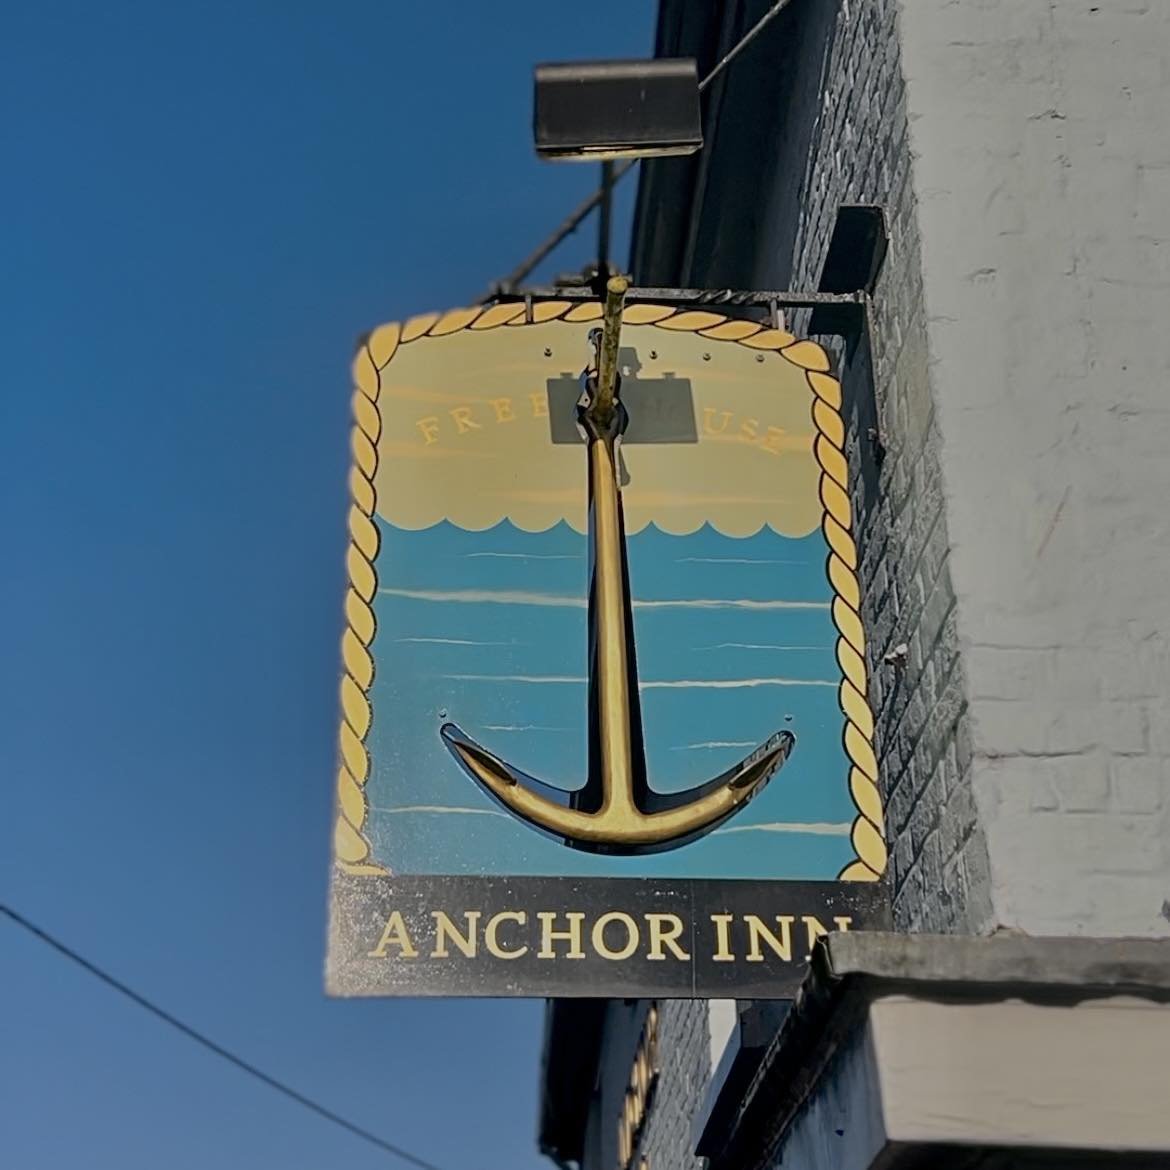 Happy Bank Holiday Monday from all the team at The Anchor! 

#anchorinn #anchorinnpub #anchornayland #Nayland #Naylandsuffolk #suffolkcountyinns #suffolk #suffolkpub #suffolkcountryside #essex #essexpub #colchester #colchesterpubs #pub #pubfood